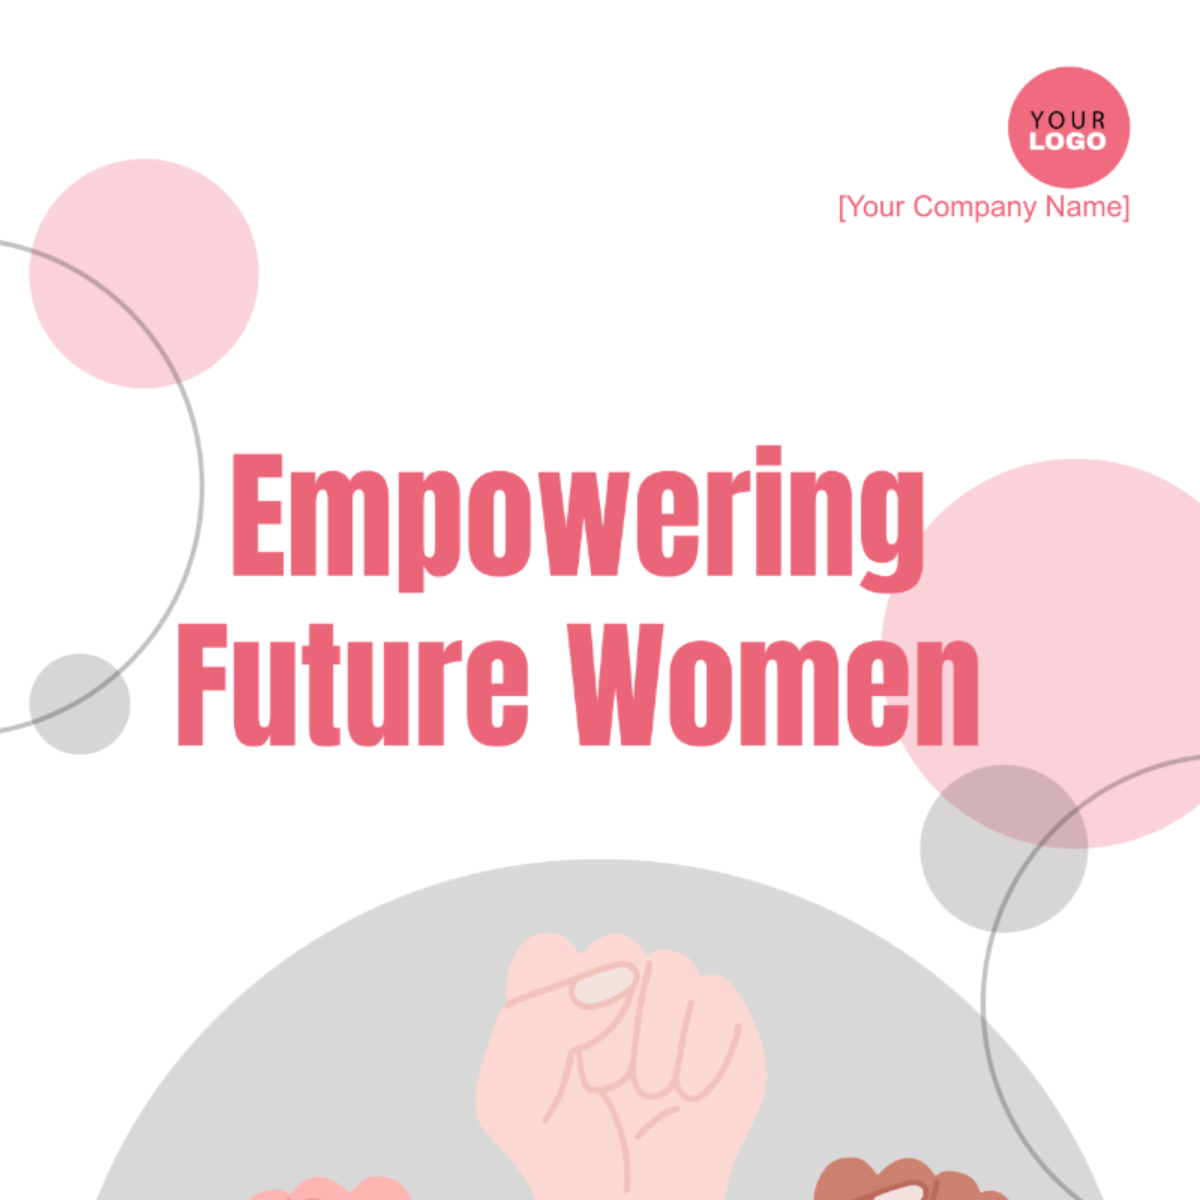 Empowering Future Generations of Women Essay Template